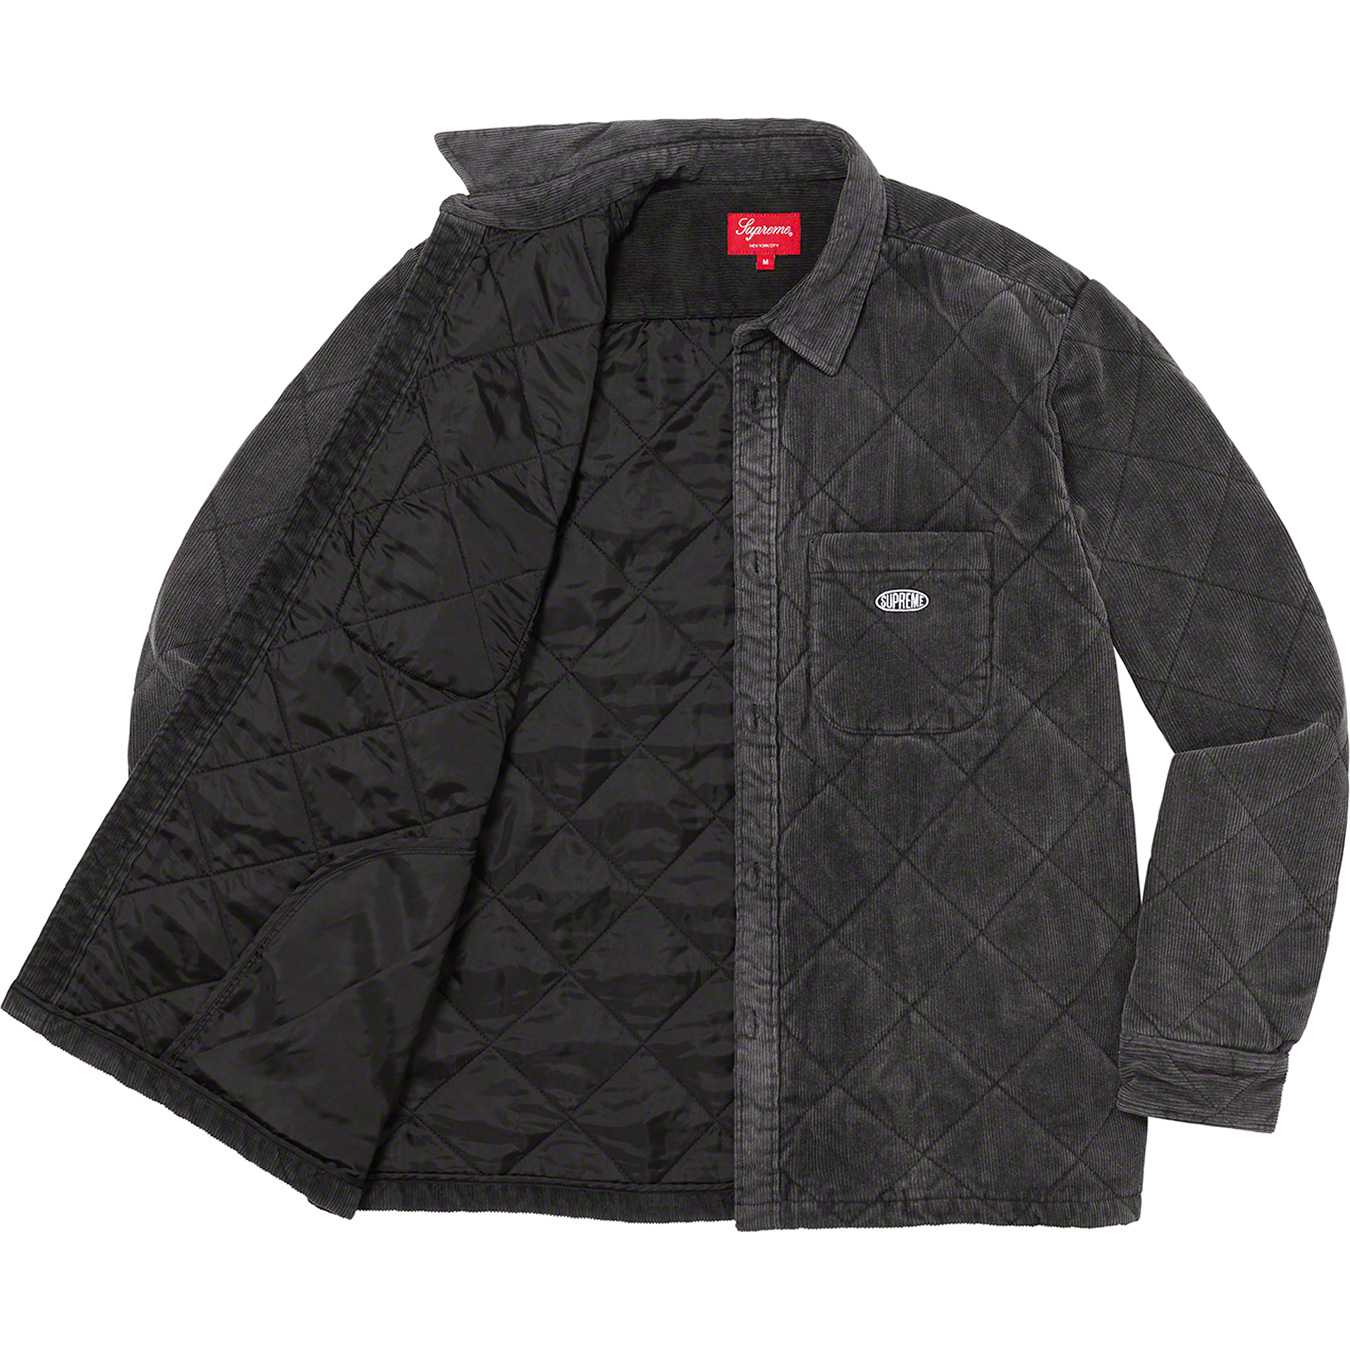 Quilted Corduroy Shirt - fall winter 2022 - Supreme